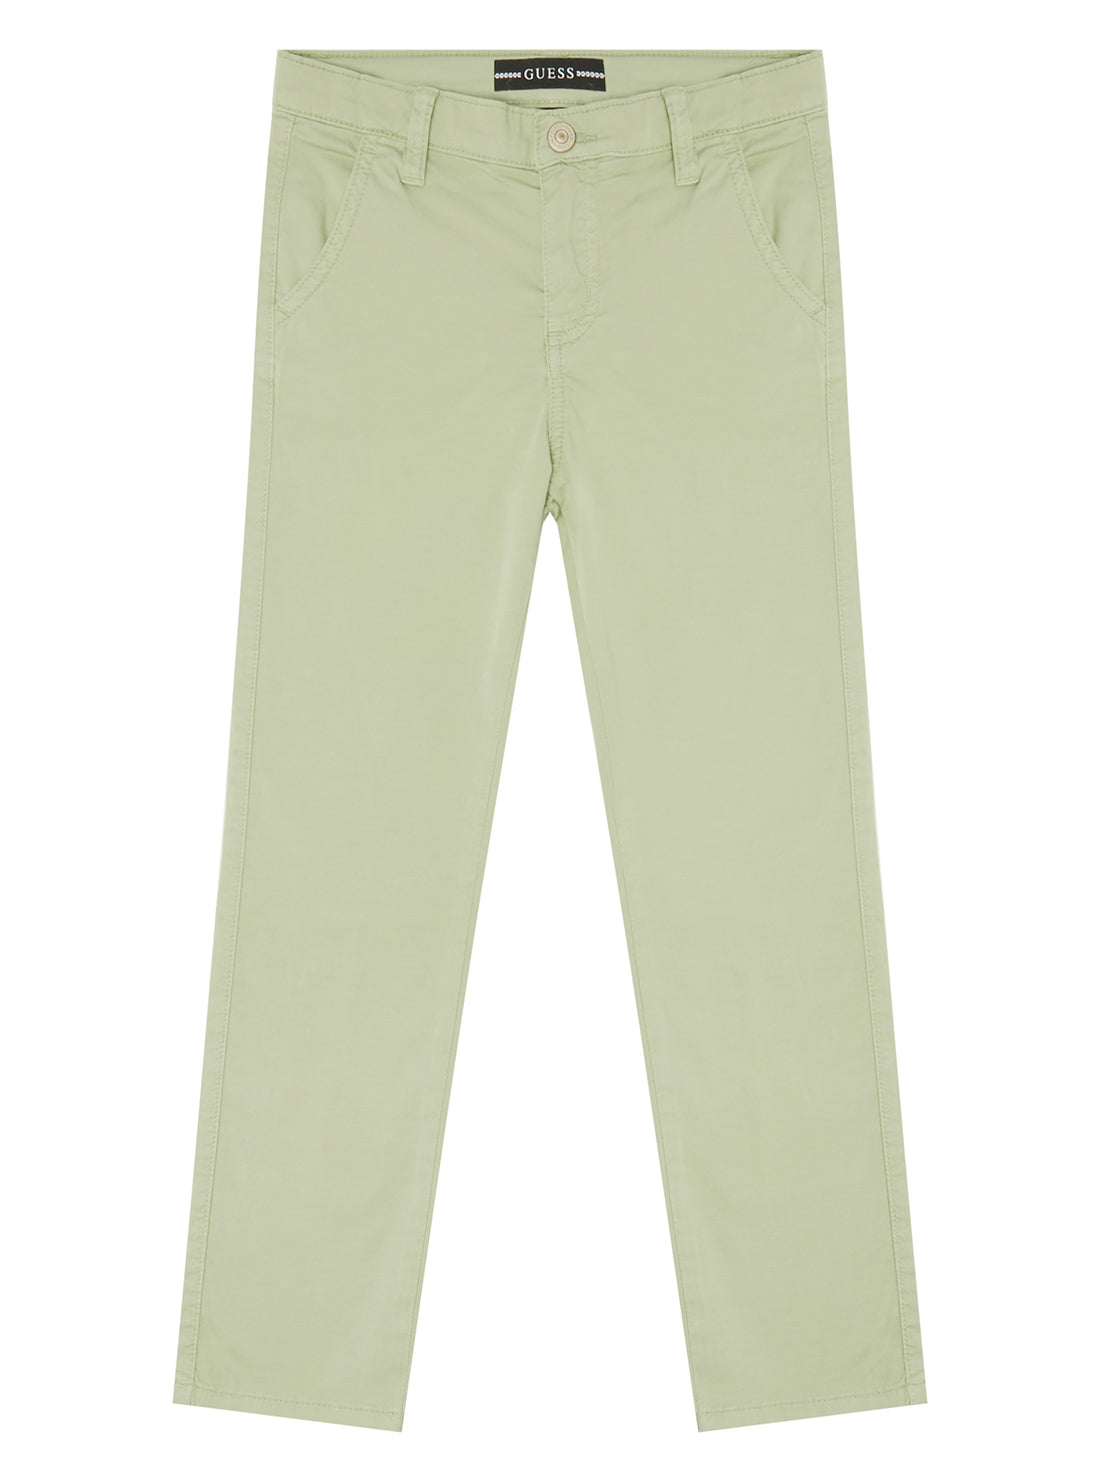 Light Green Slim Fit Chino Pants (2-7) | GUESS Kids | front view